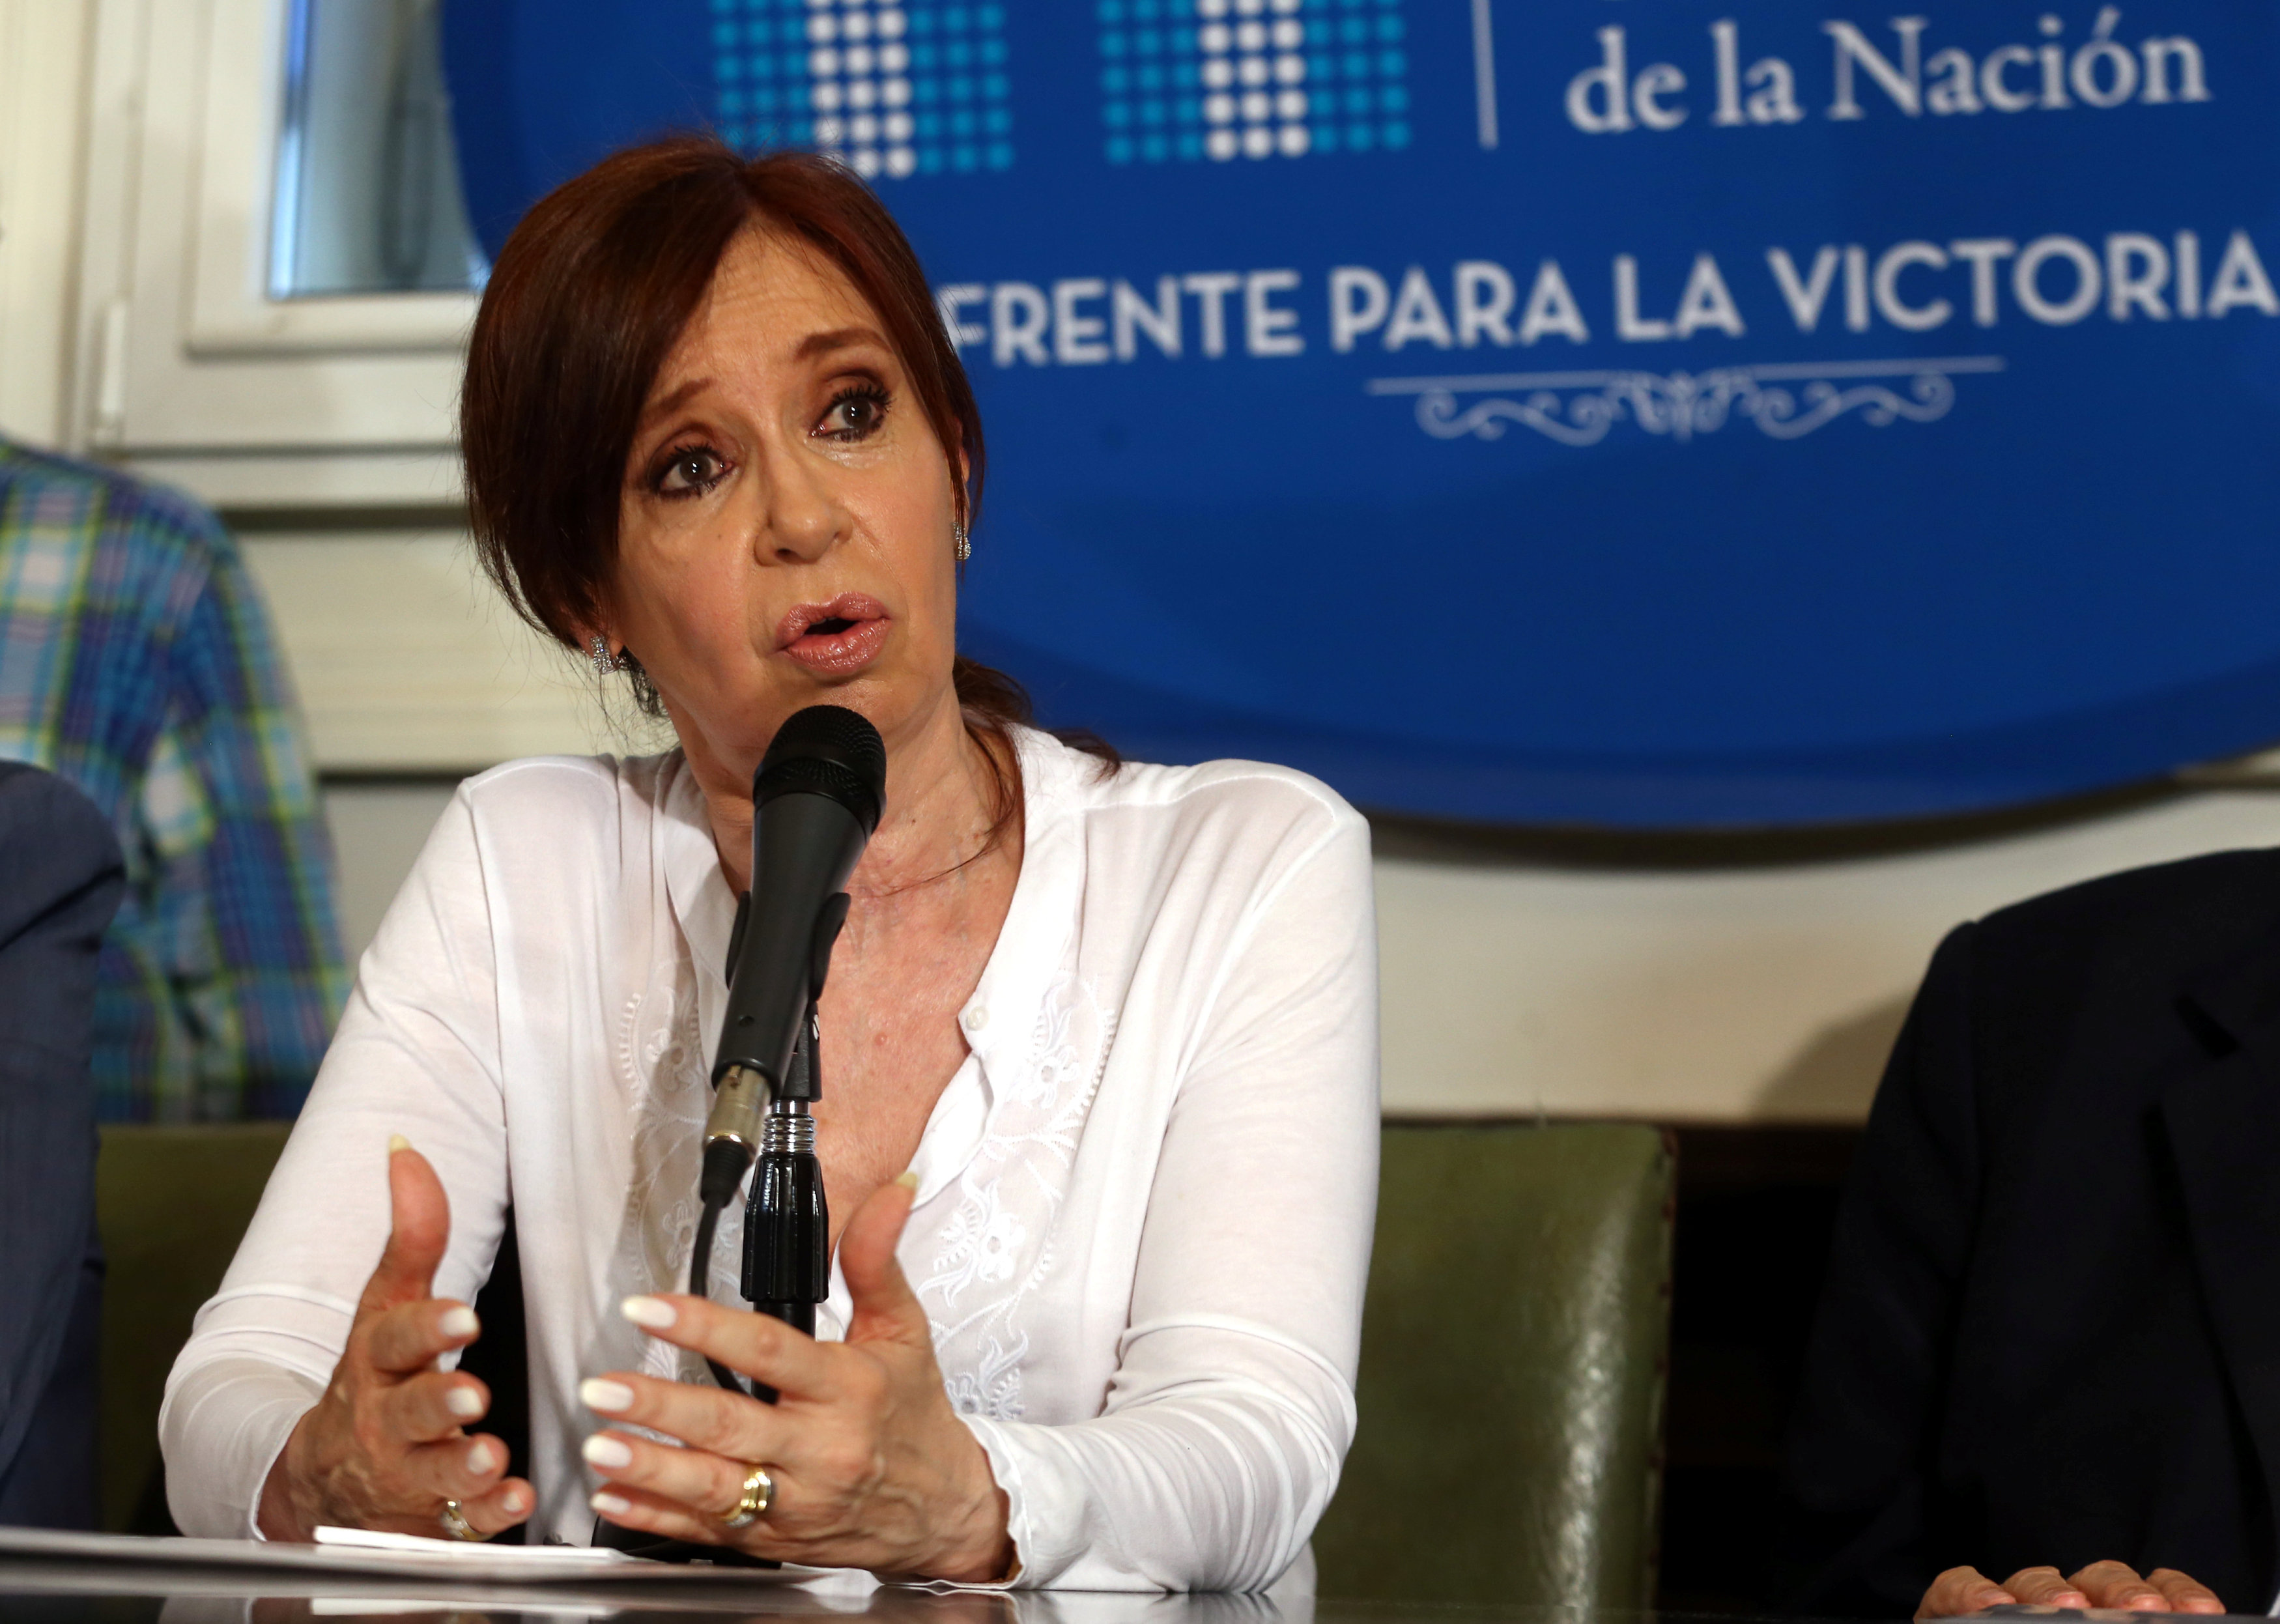 Former Argentine President and Senator Cristina Fernandez de Kirchner speaks during a news conference at the Congress in Buenos Aires